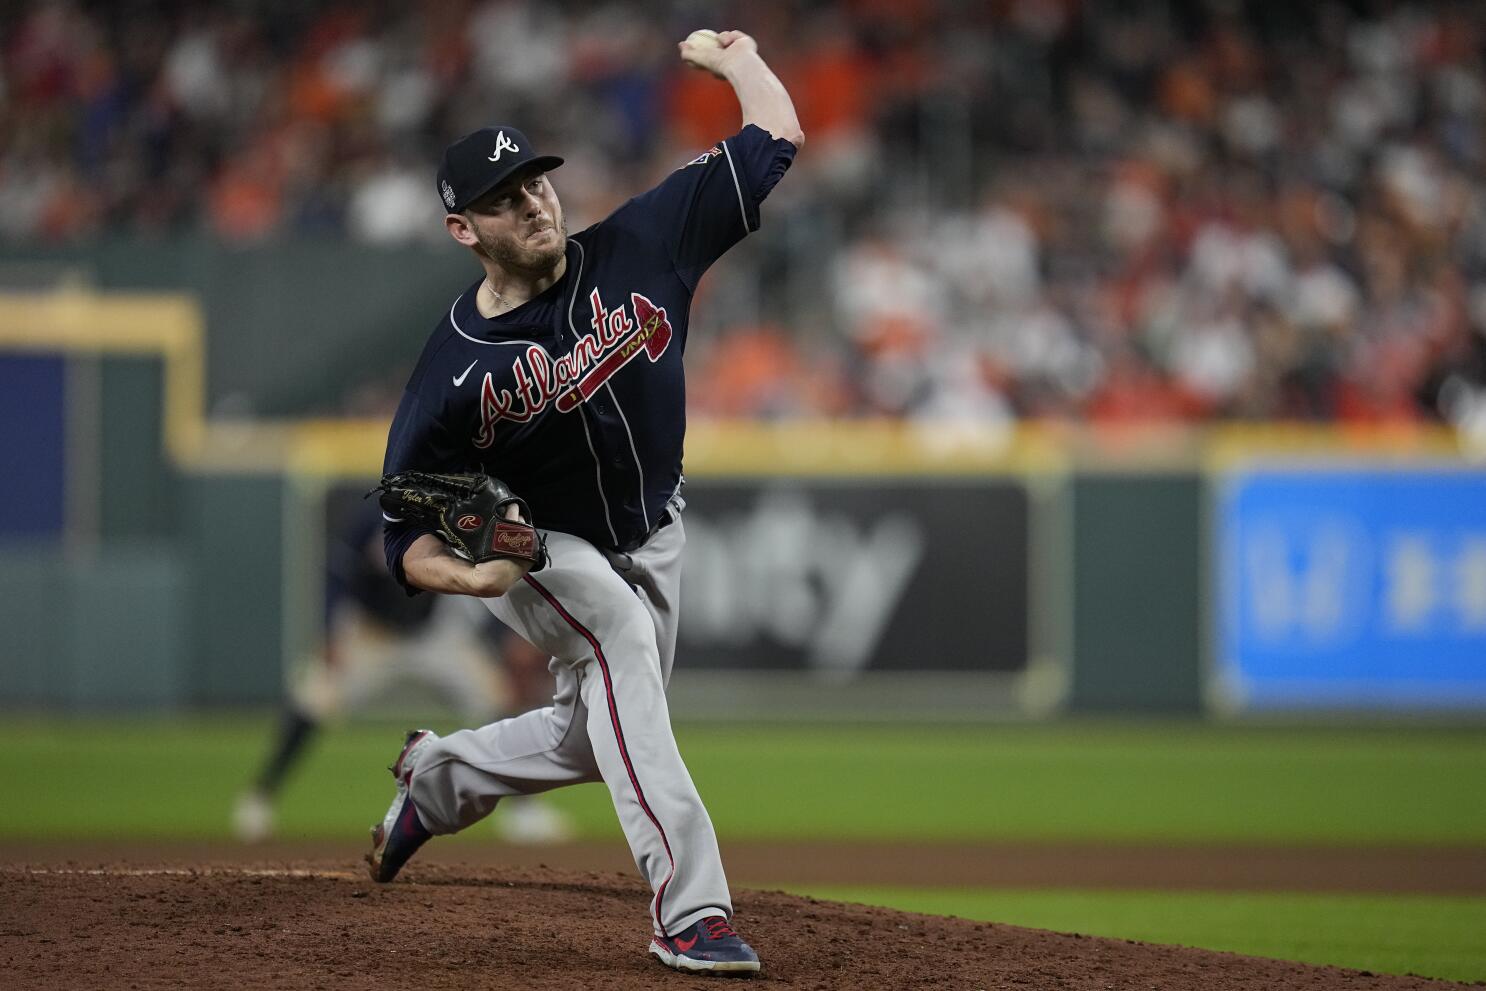 Braves using starting pitcher to clinch World Series feels nostalgic